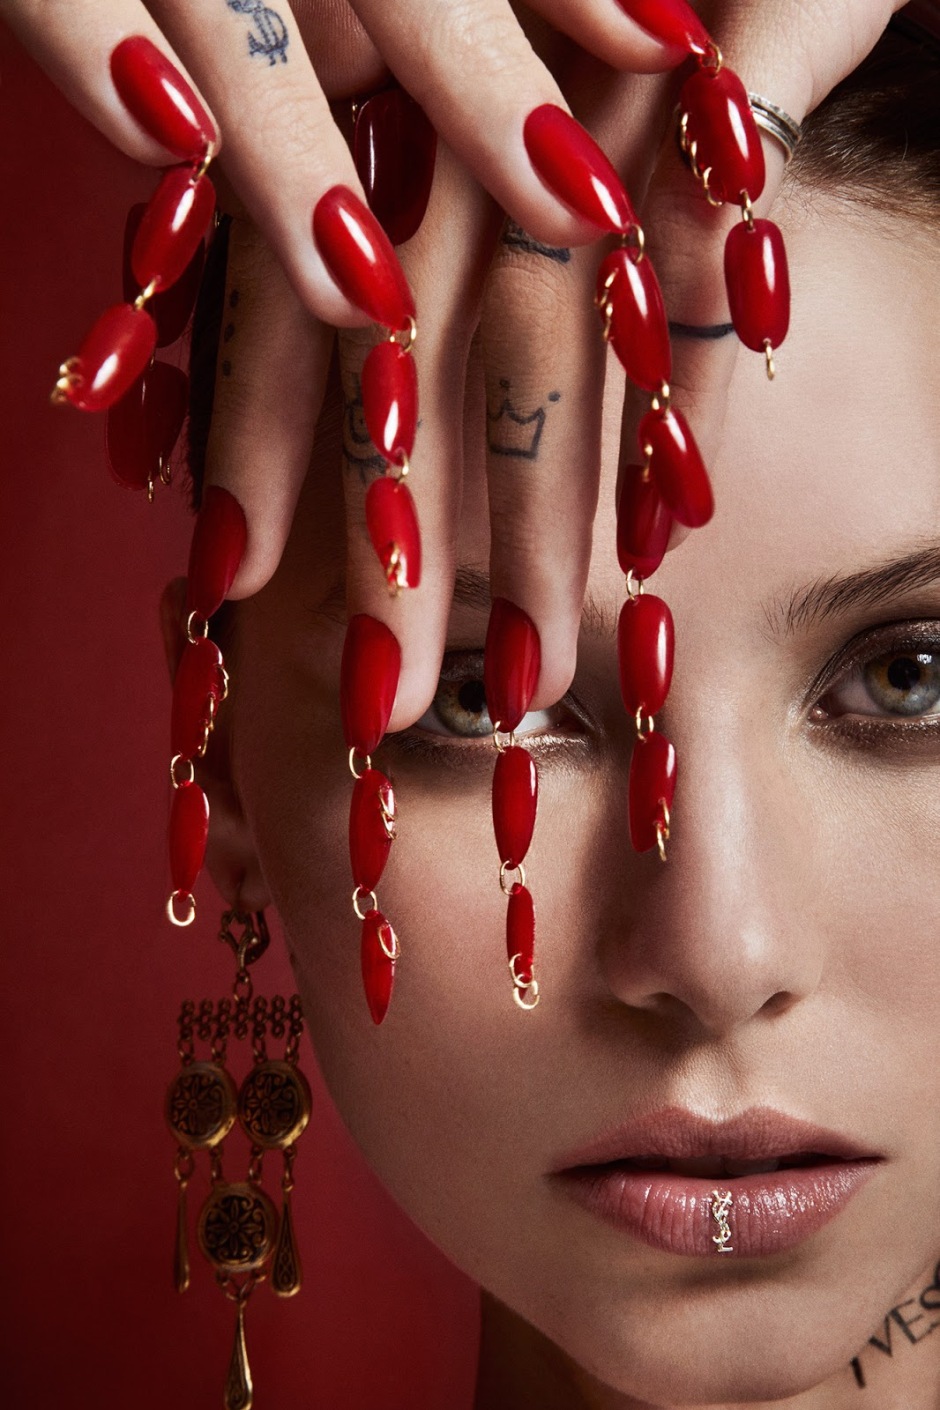 dripping-nails-manicure-chains-pierced-nails